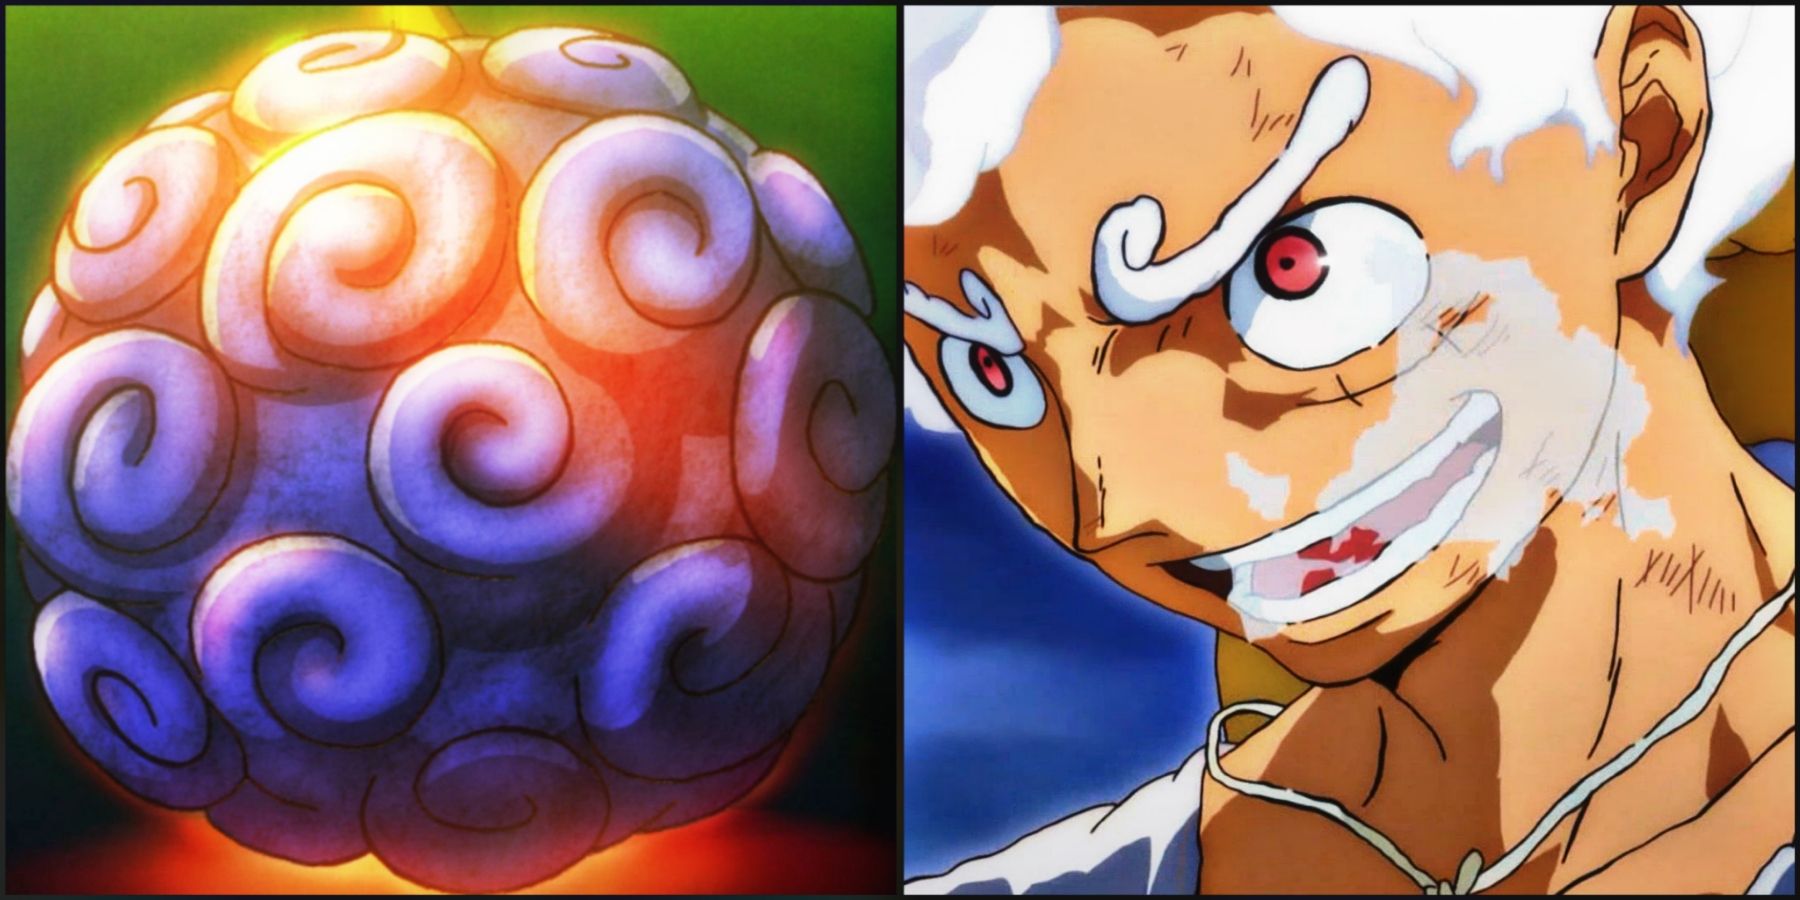 Powers & Abilities - Gomu Gomu no mi: a devil fruit that is worth 5 billion  berry, what's the secret behind this power?